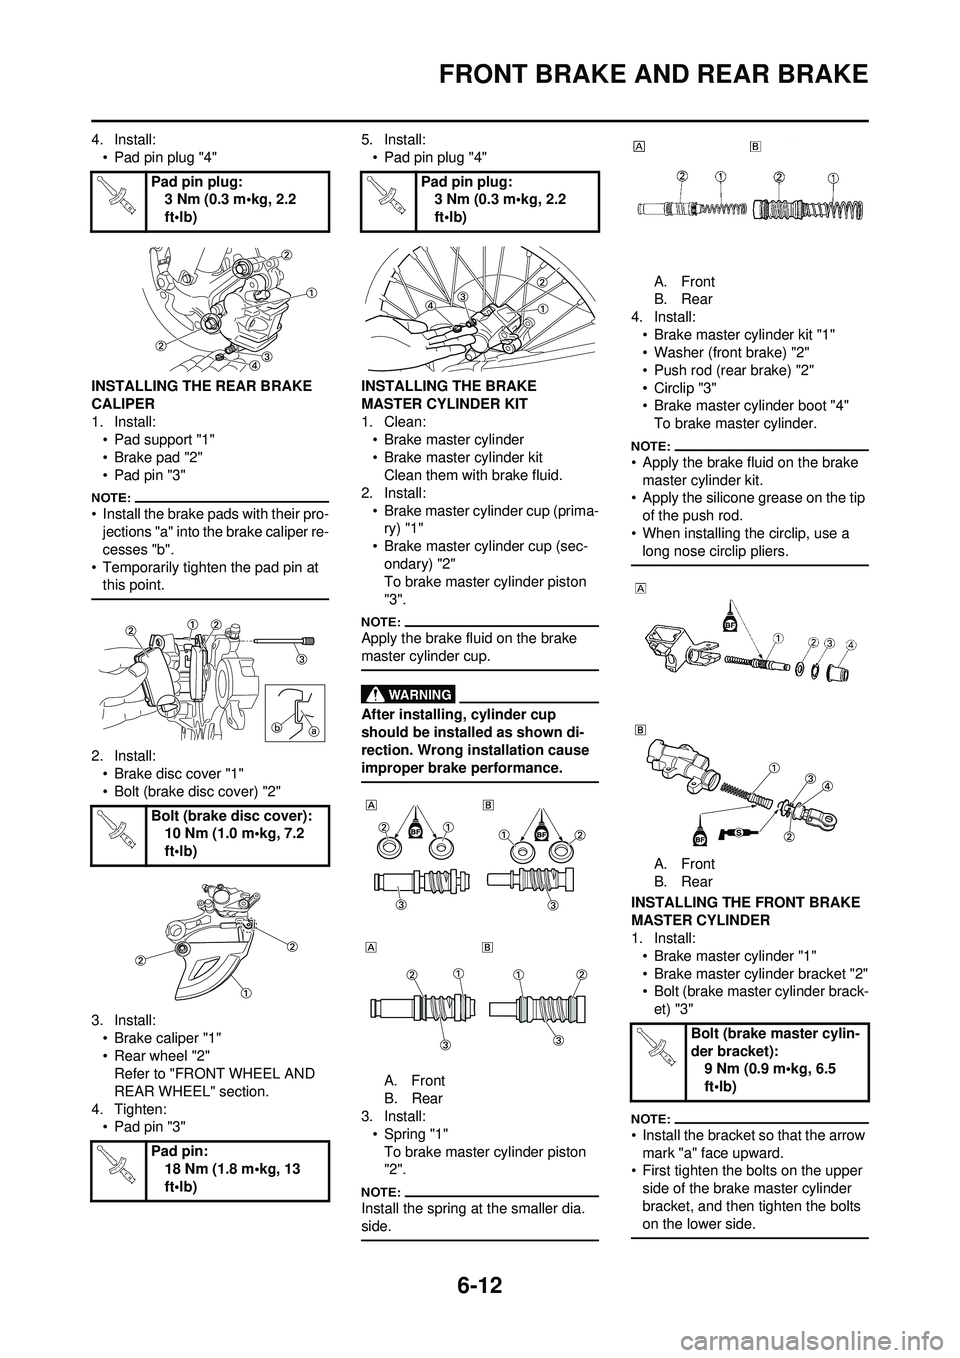 YAMAHA WR 250F 2008  Owners Manual 6-12
FRONT BRAKE AND REAR BRAKE
4. Install:• Pad pin plug "4"
INSTALLING THE REAR BRAKE 
CALIPER
1. Install: • Pad support "1"
• Brake pad "2"
• Pad pin "3"
• Install the brake pads with the